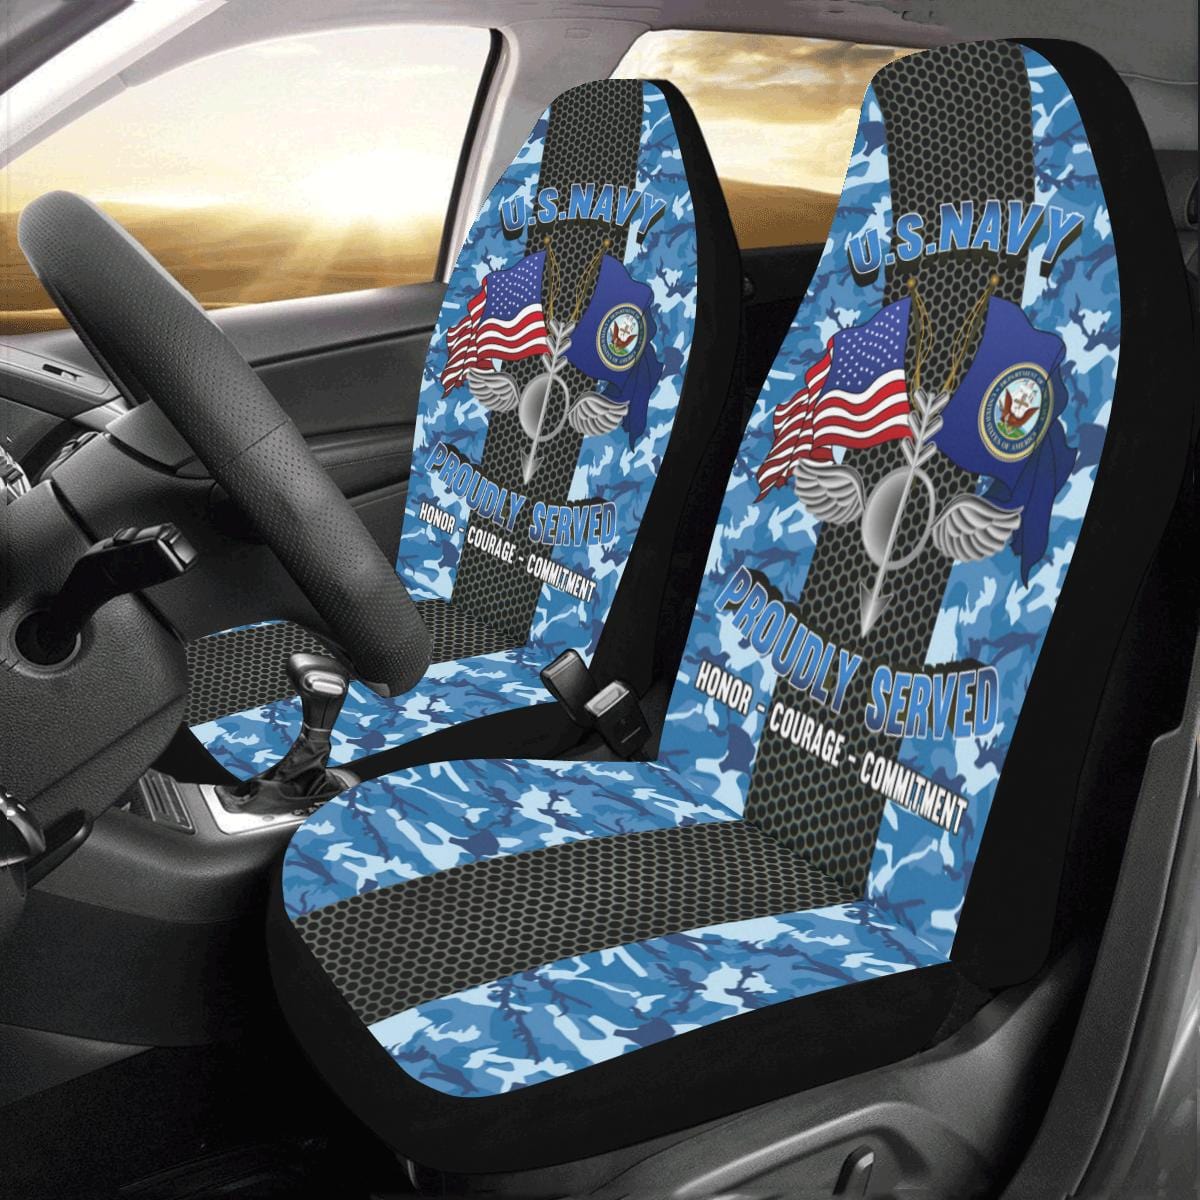 Navy Aerographers Mate Navy AG Car Seat Covers (Set of 2)-SeatCovers-Navy-Rate-Veterans Nation